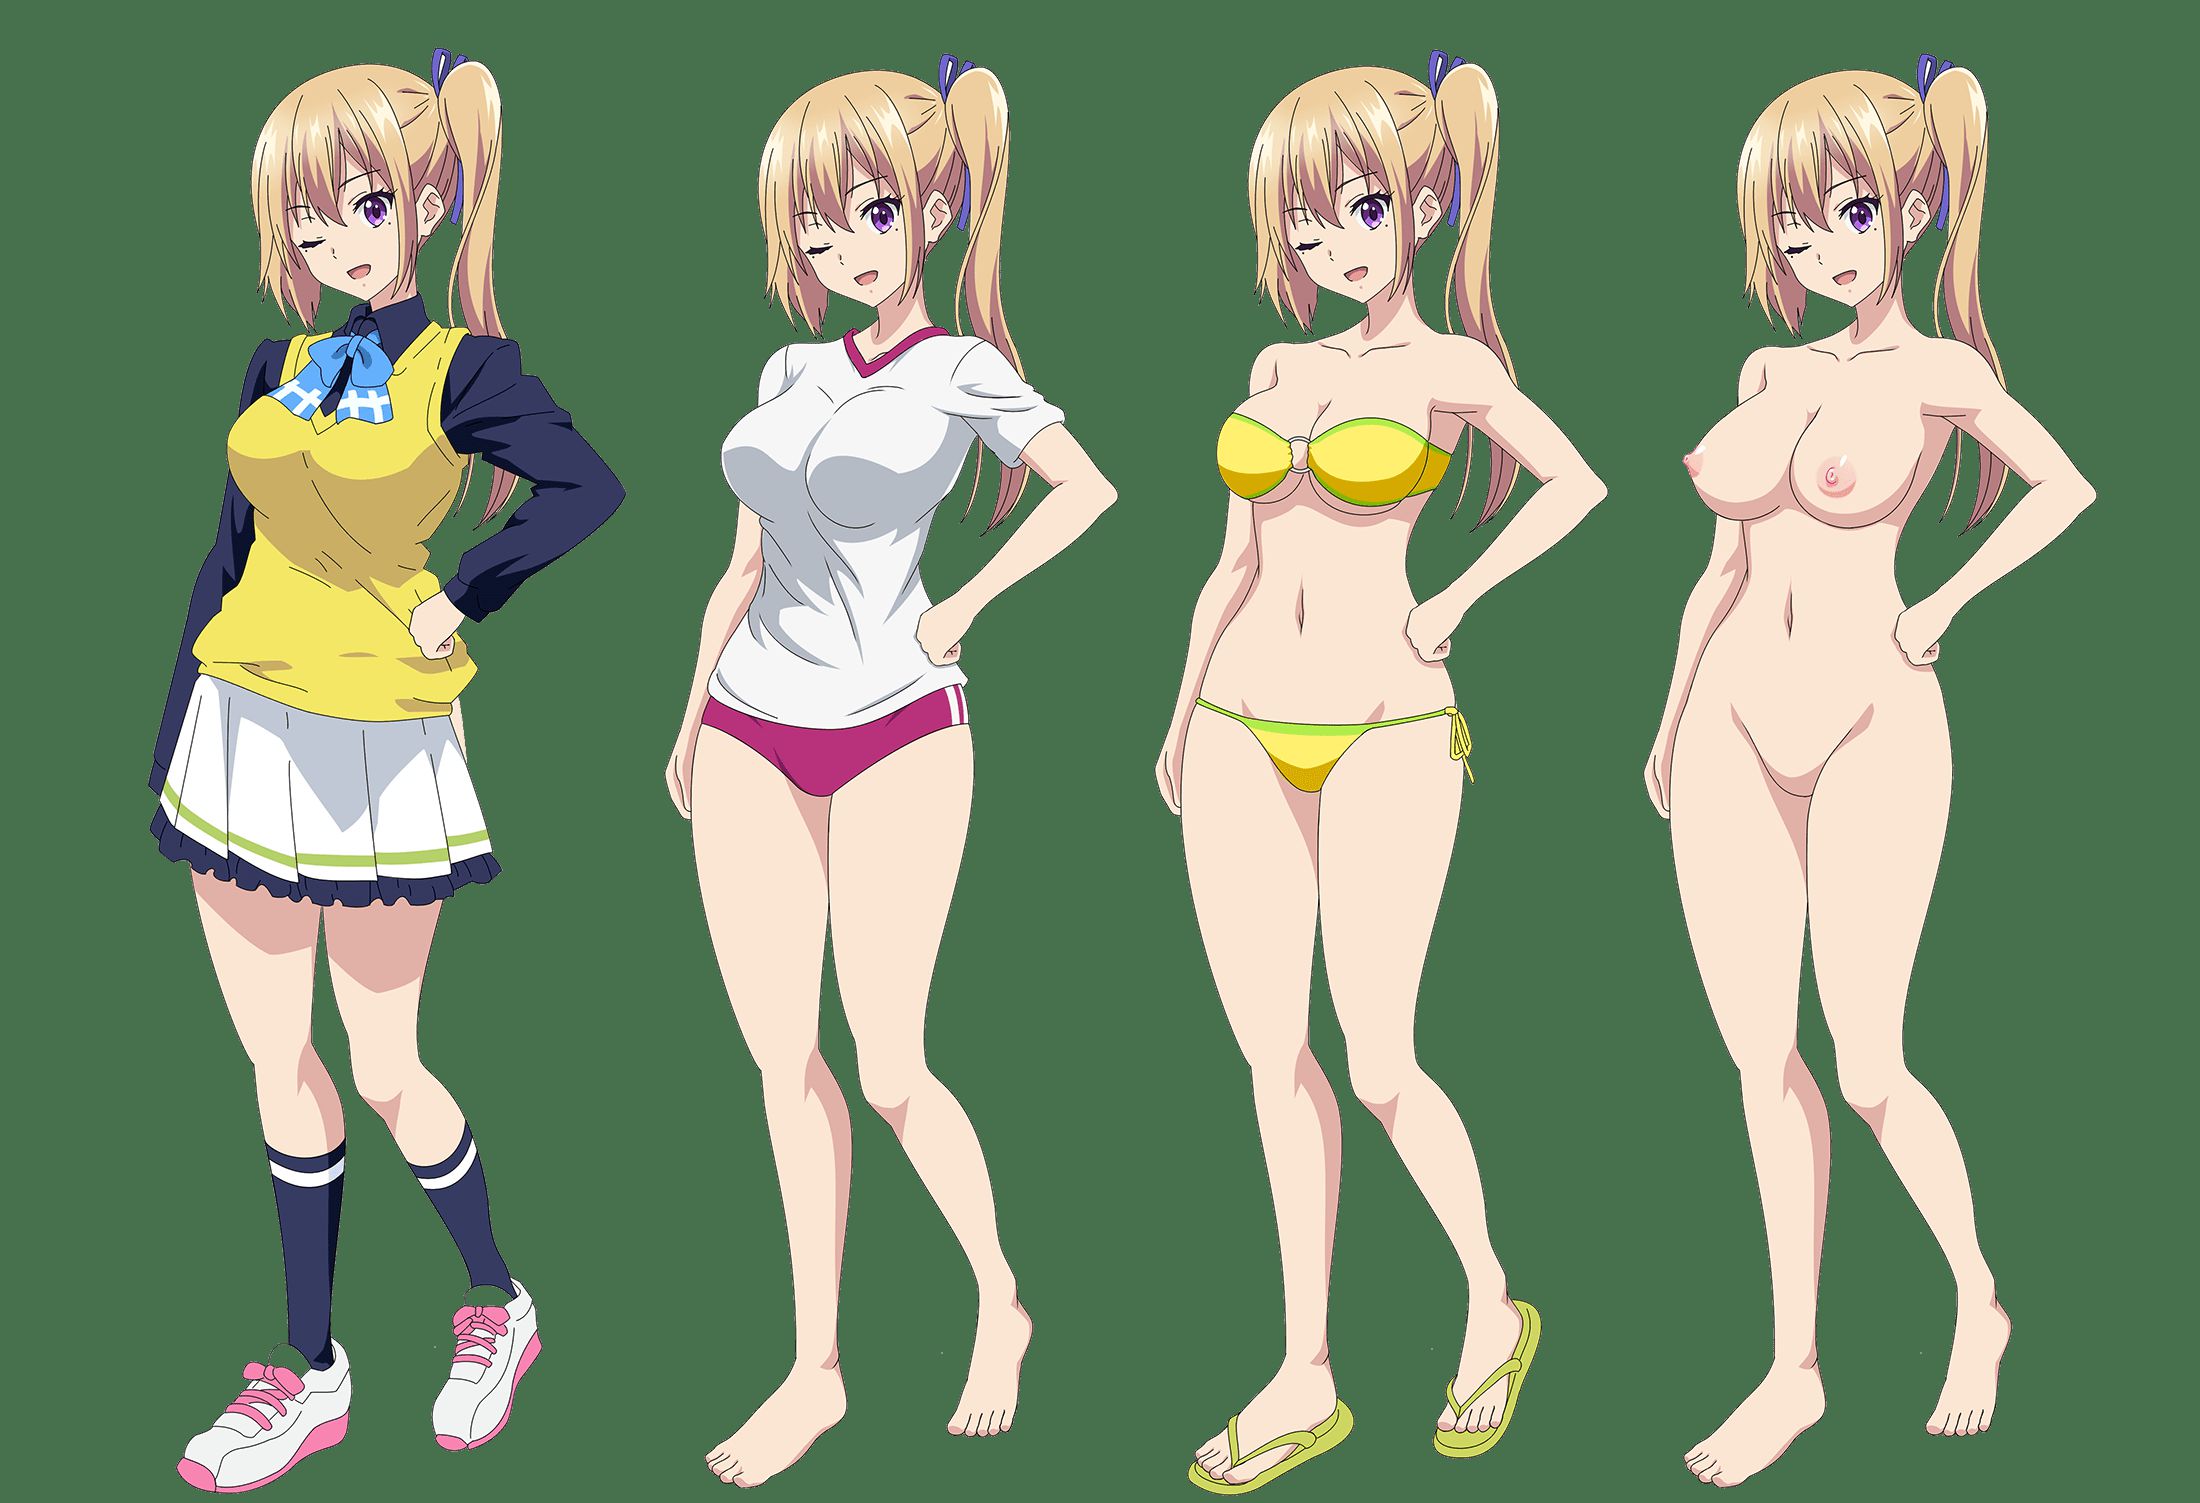 [Anime character material] png background erotic images of anime characters 86 18